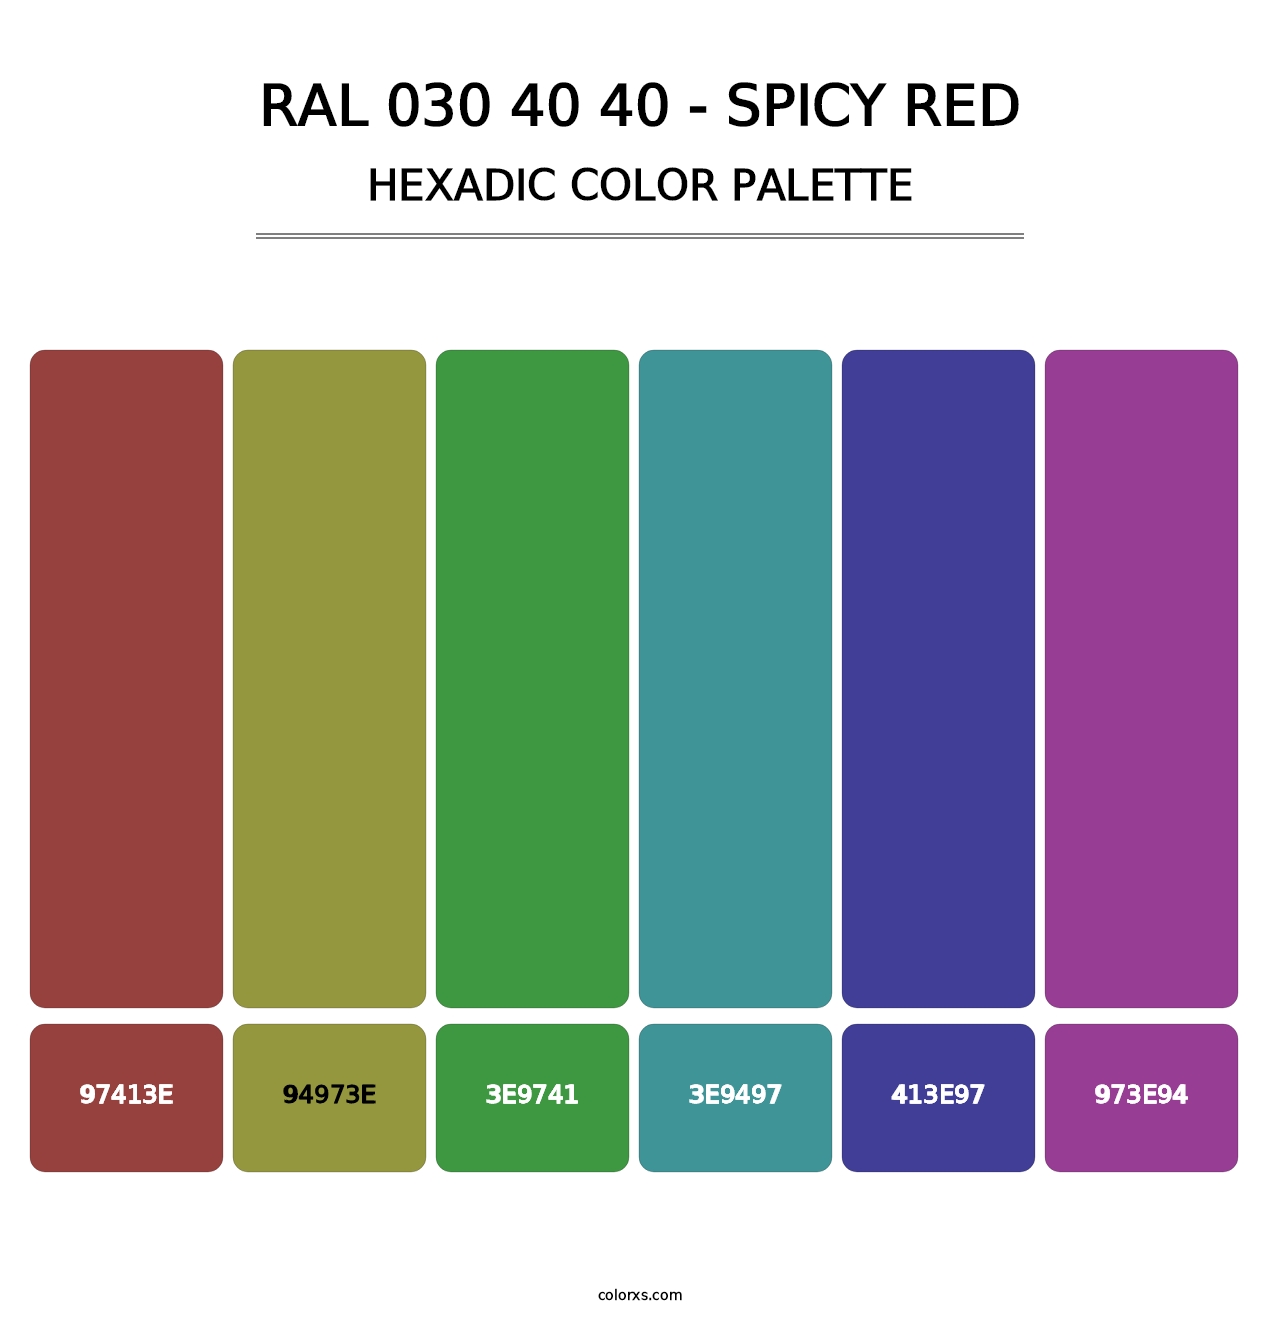 RAL 030 40 40 - Spicy Red - Hexadic Color Palette